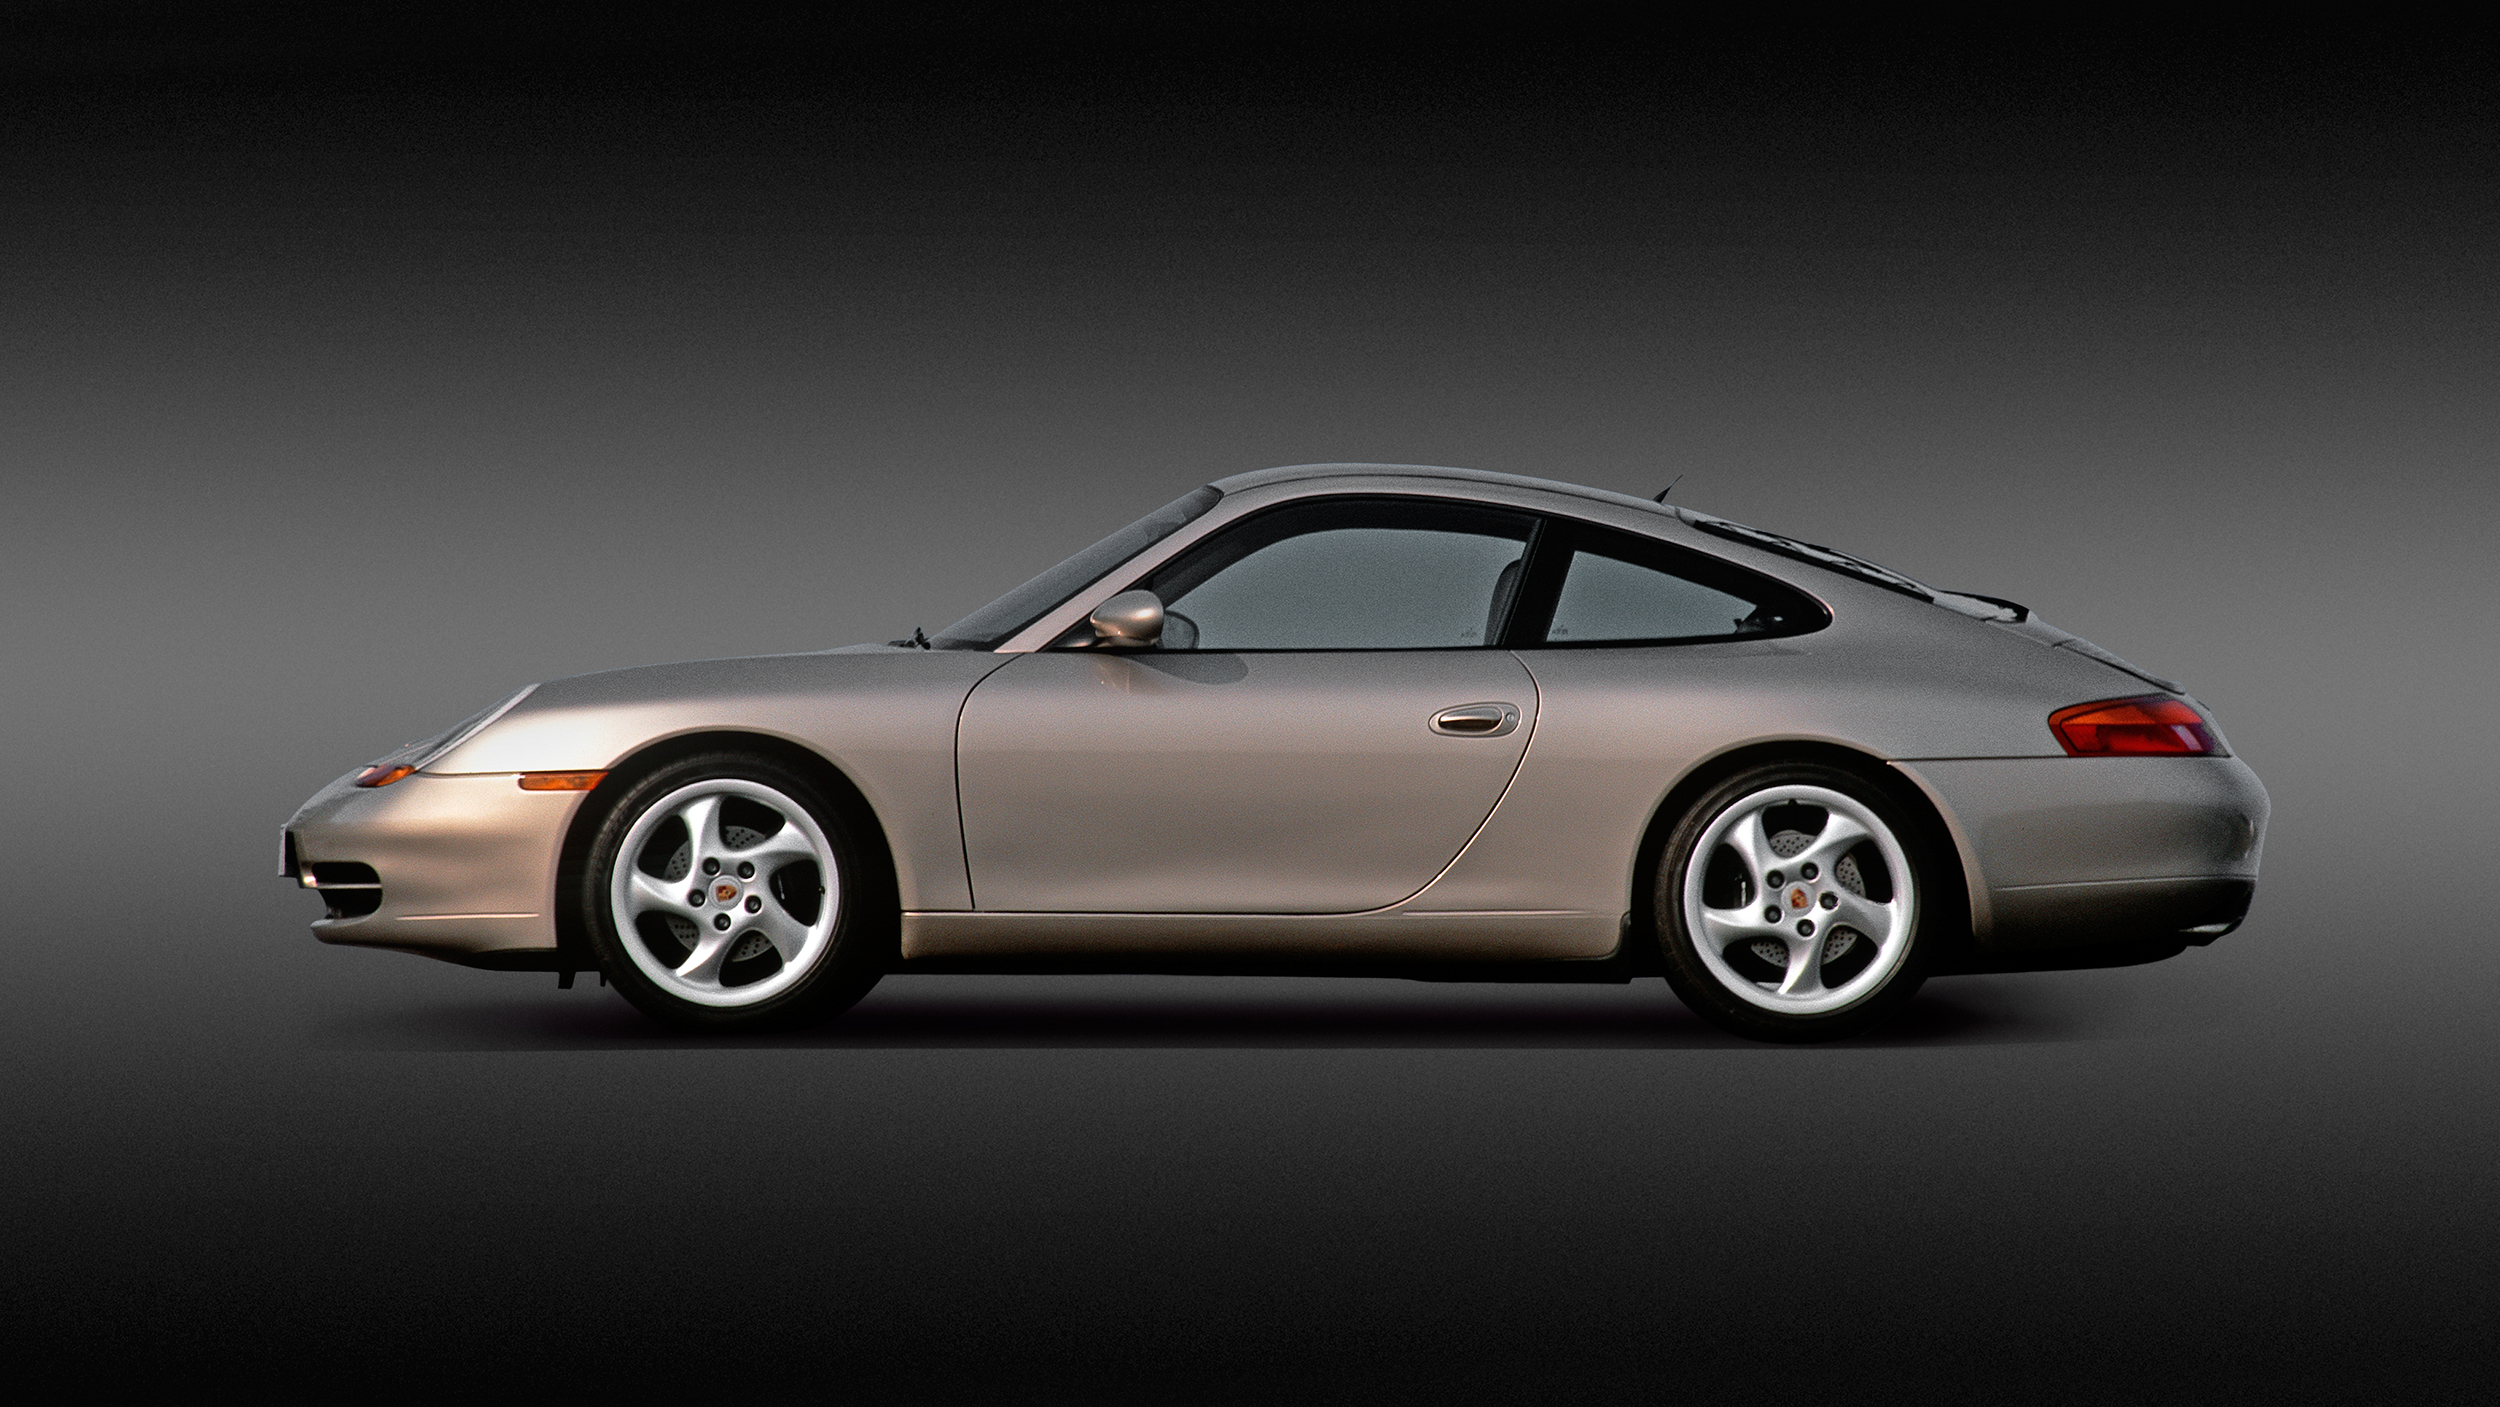 1997: The 996 with water cooling - Production anniversary of the